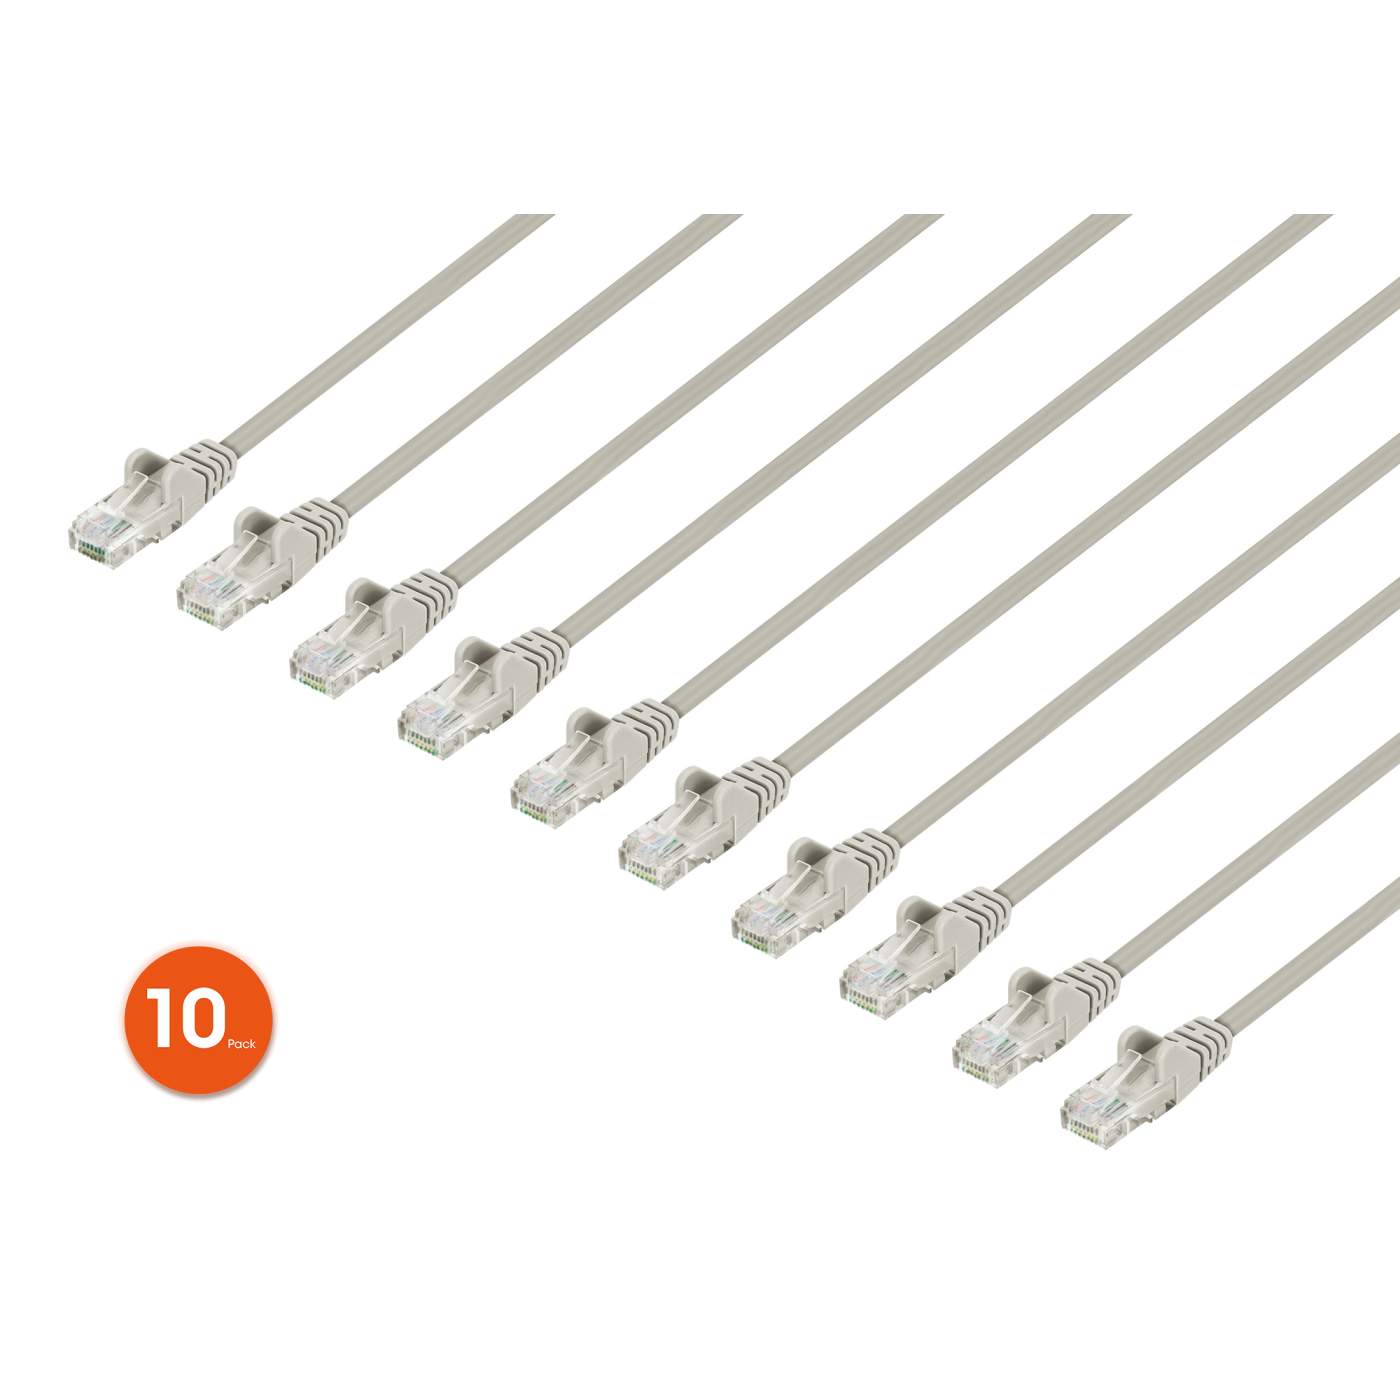 Cat6 U/UTP Slim Network Patch Cable, 3 ft., Gray, 10-Pack Image 1